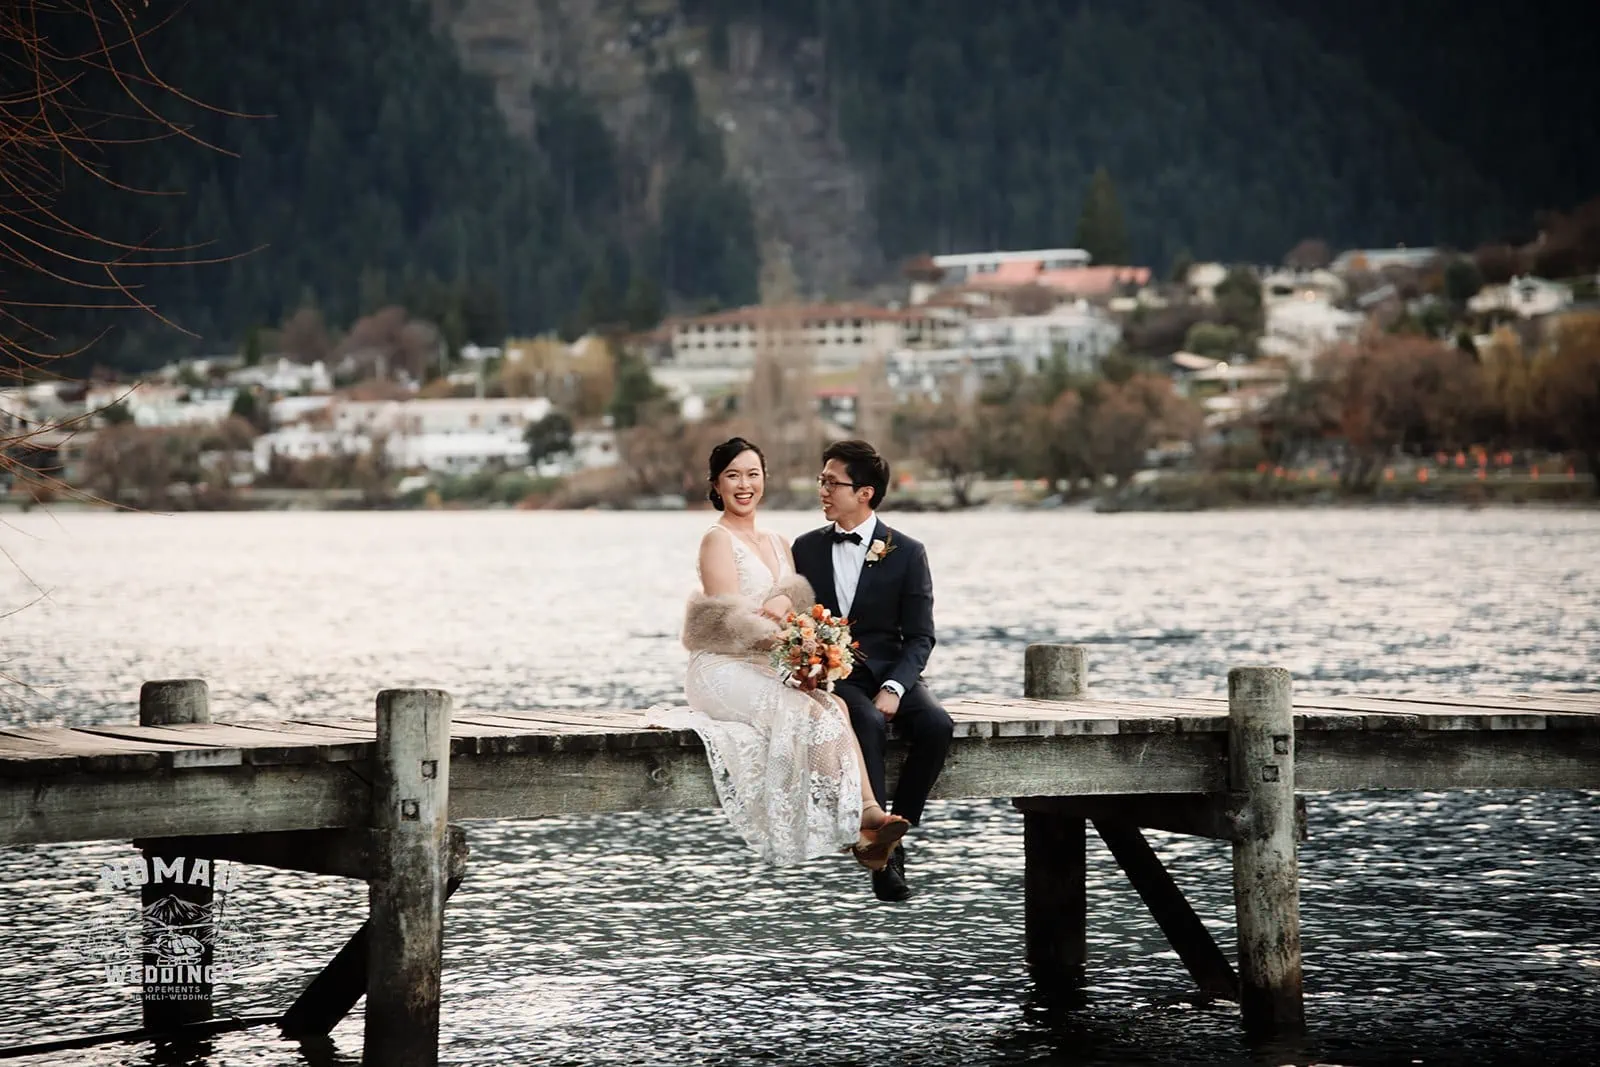 Joanna and Tony's pre-wedding shoot in Queenstown, New Zealand captures them sitting on a dock in front of a lake.